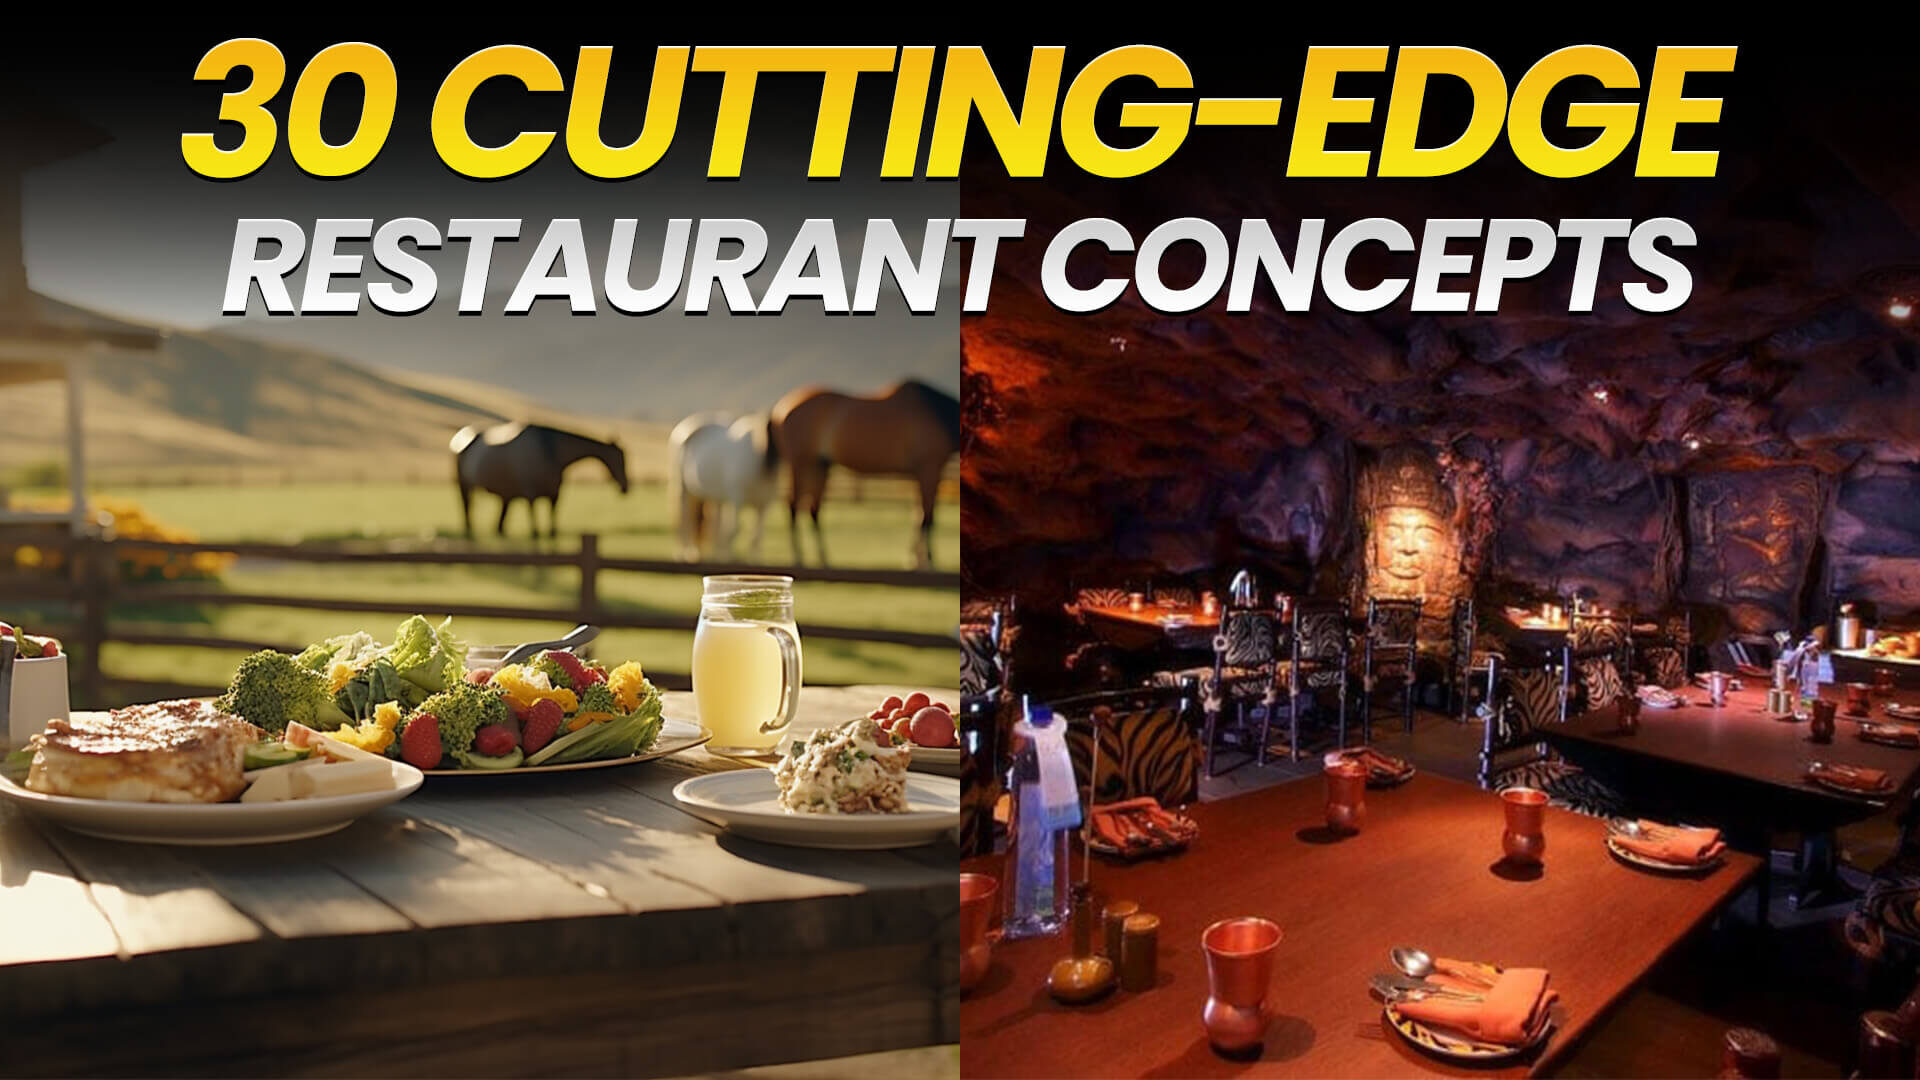 30 Cutting-Edge Restaurant Concepts You Need to Try Right Now!